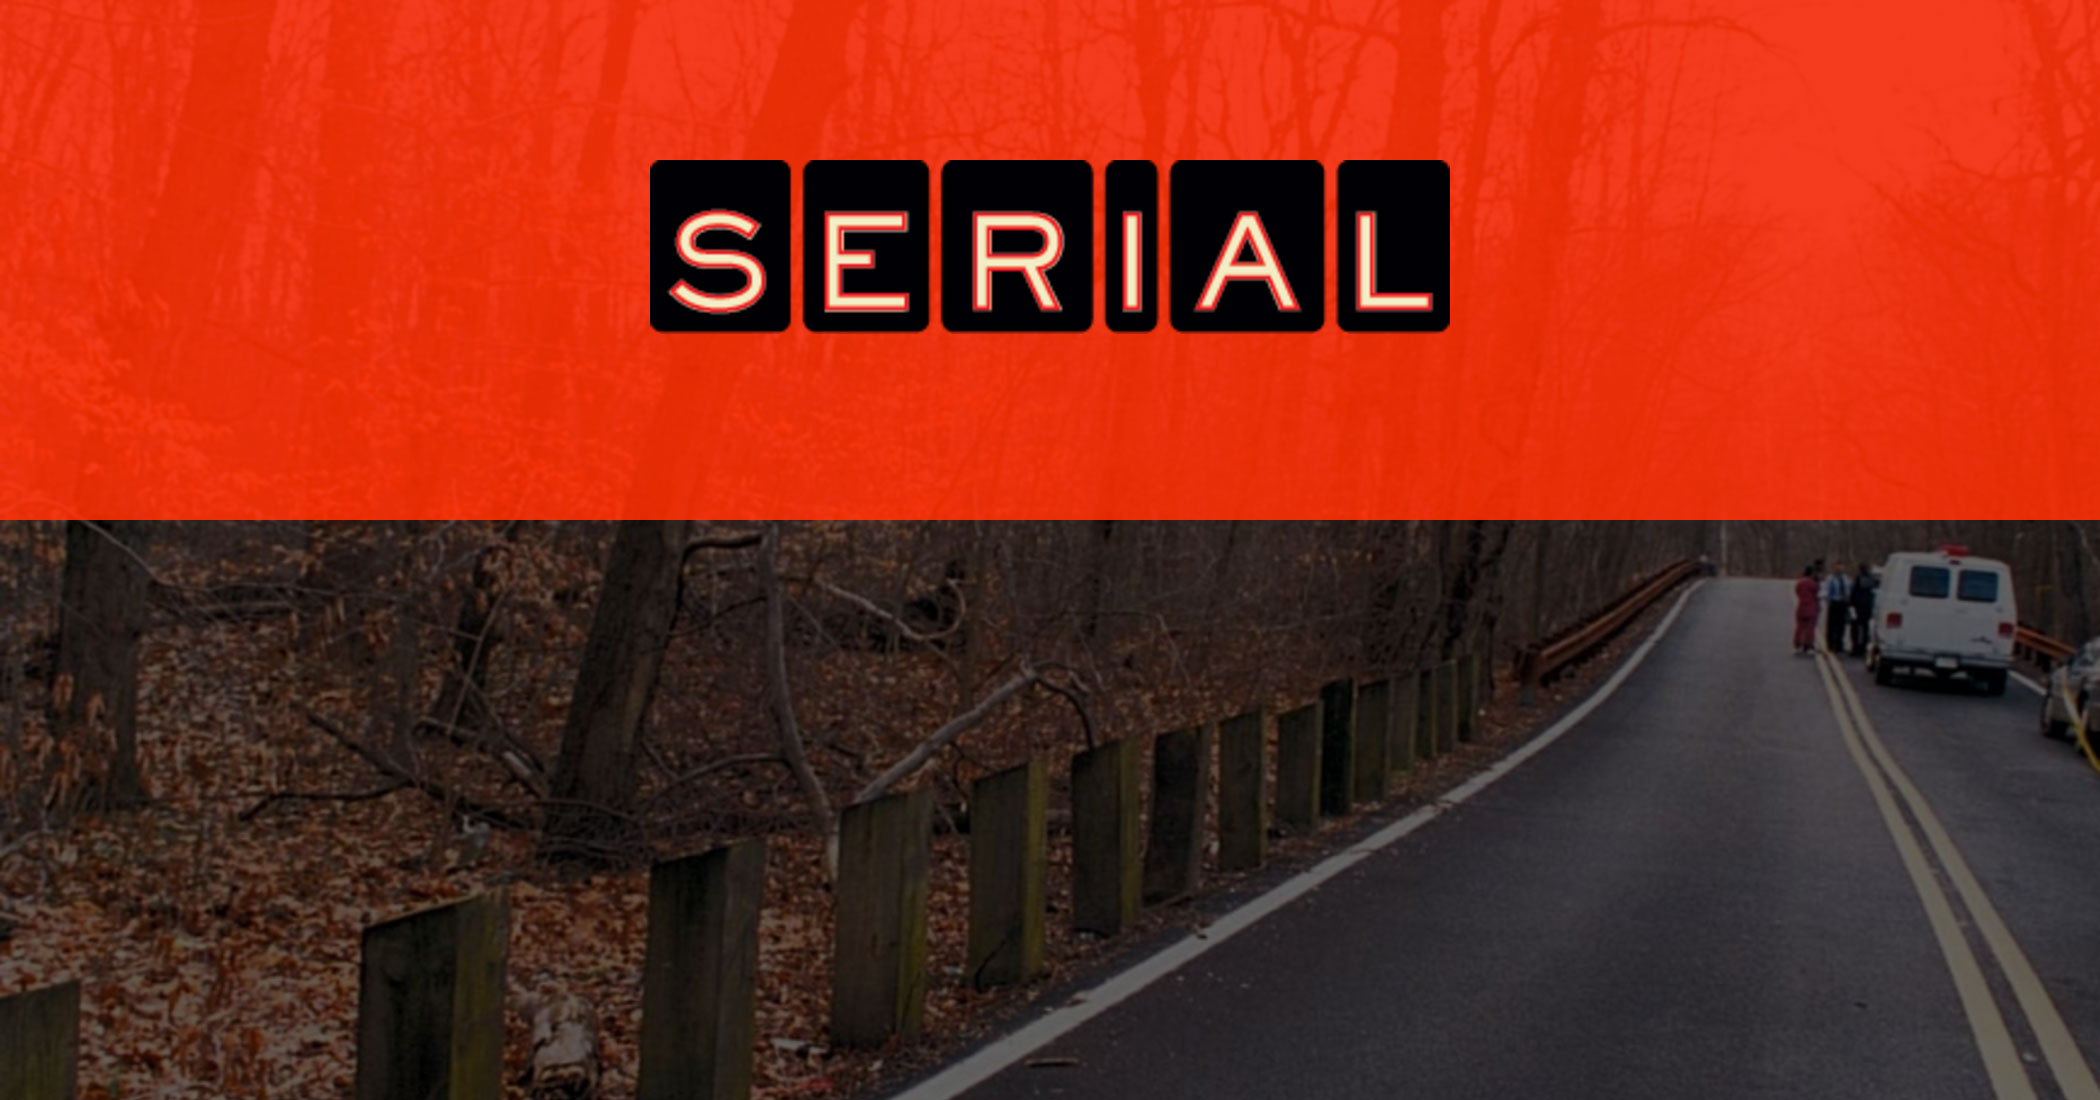 15 Podcasts You Must Listen to if You Love Serial